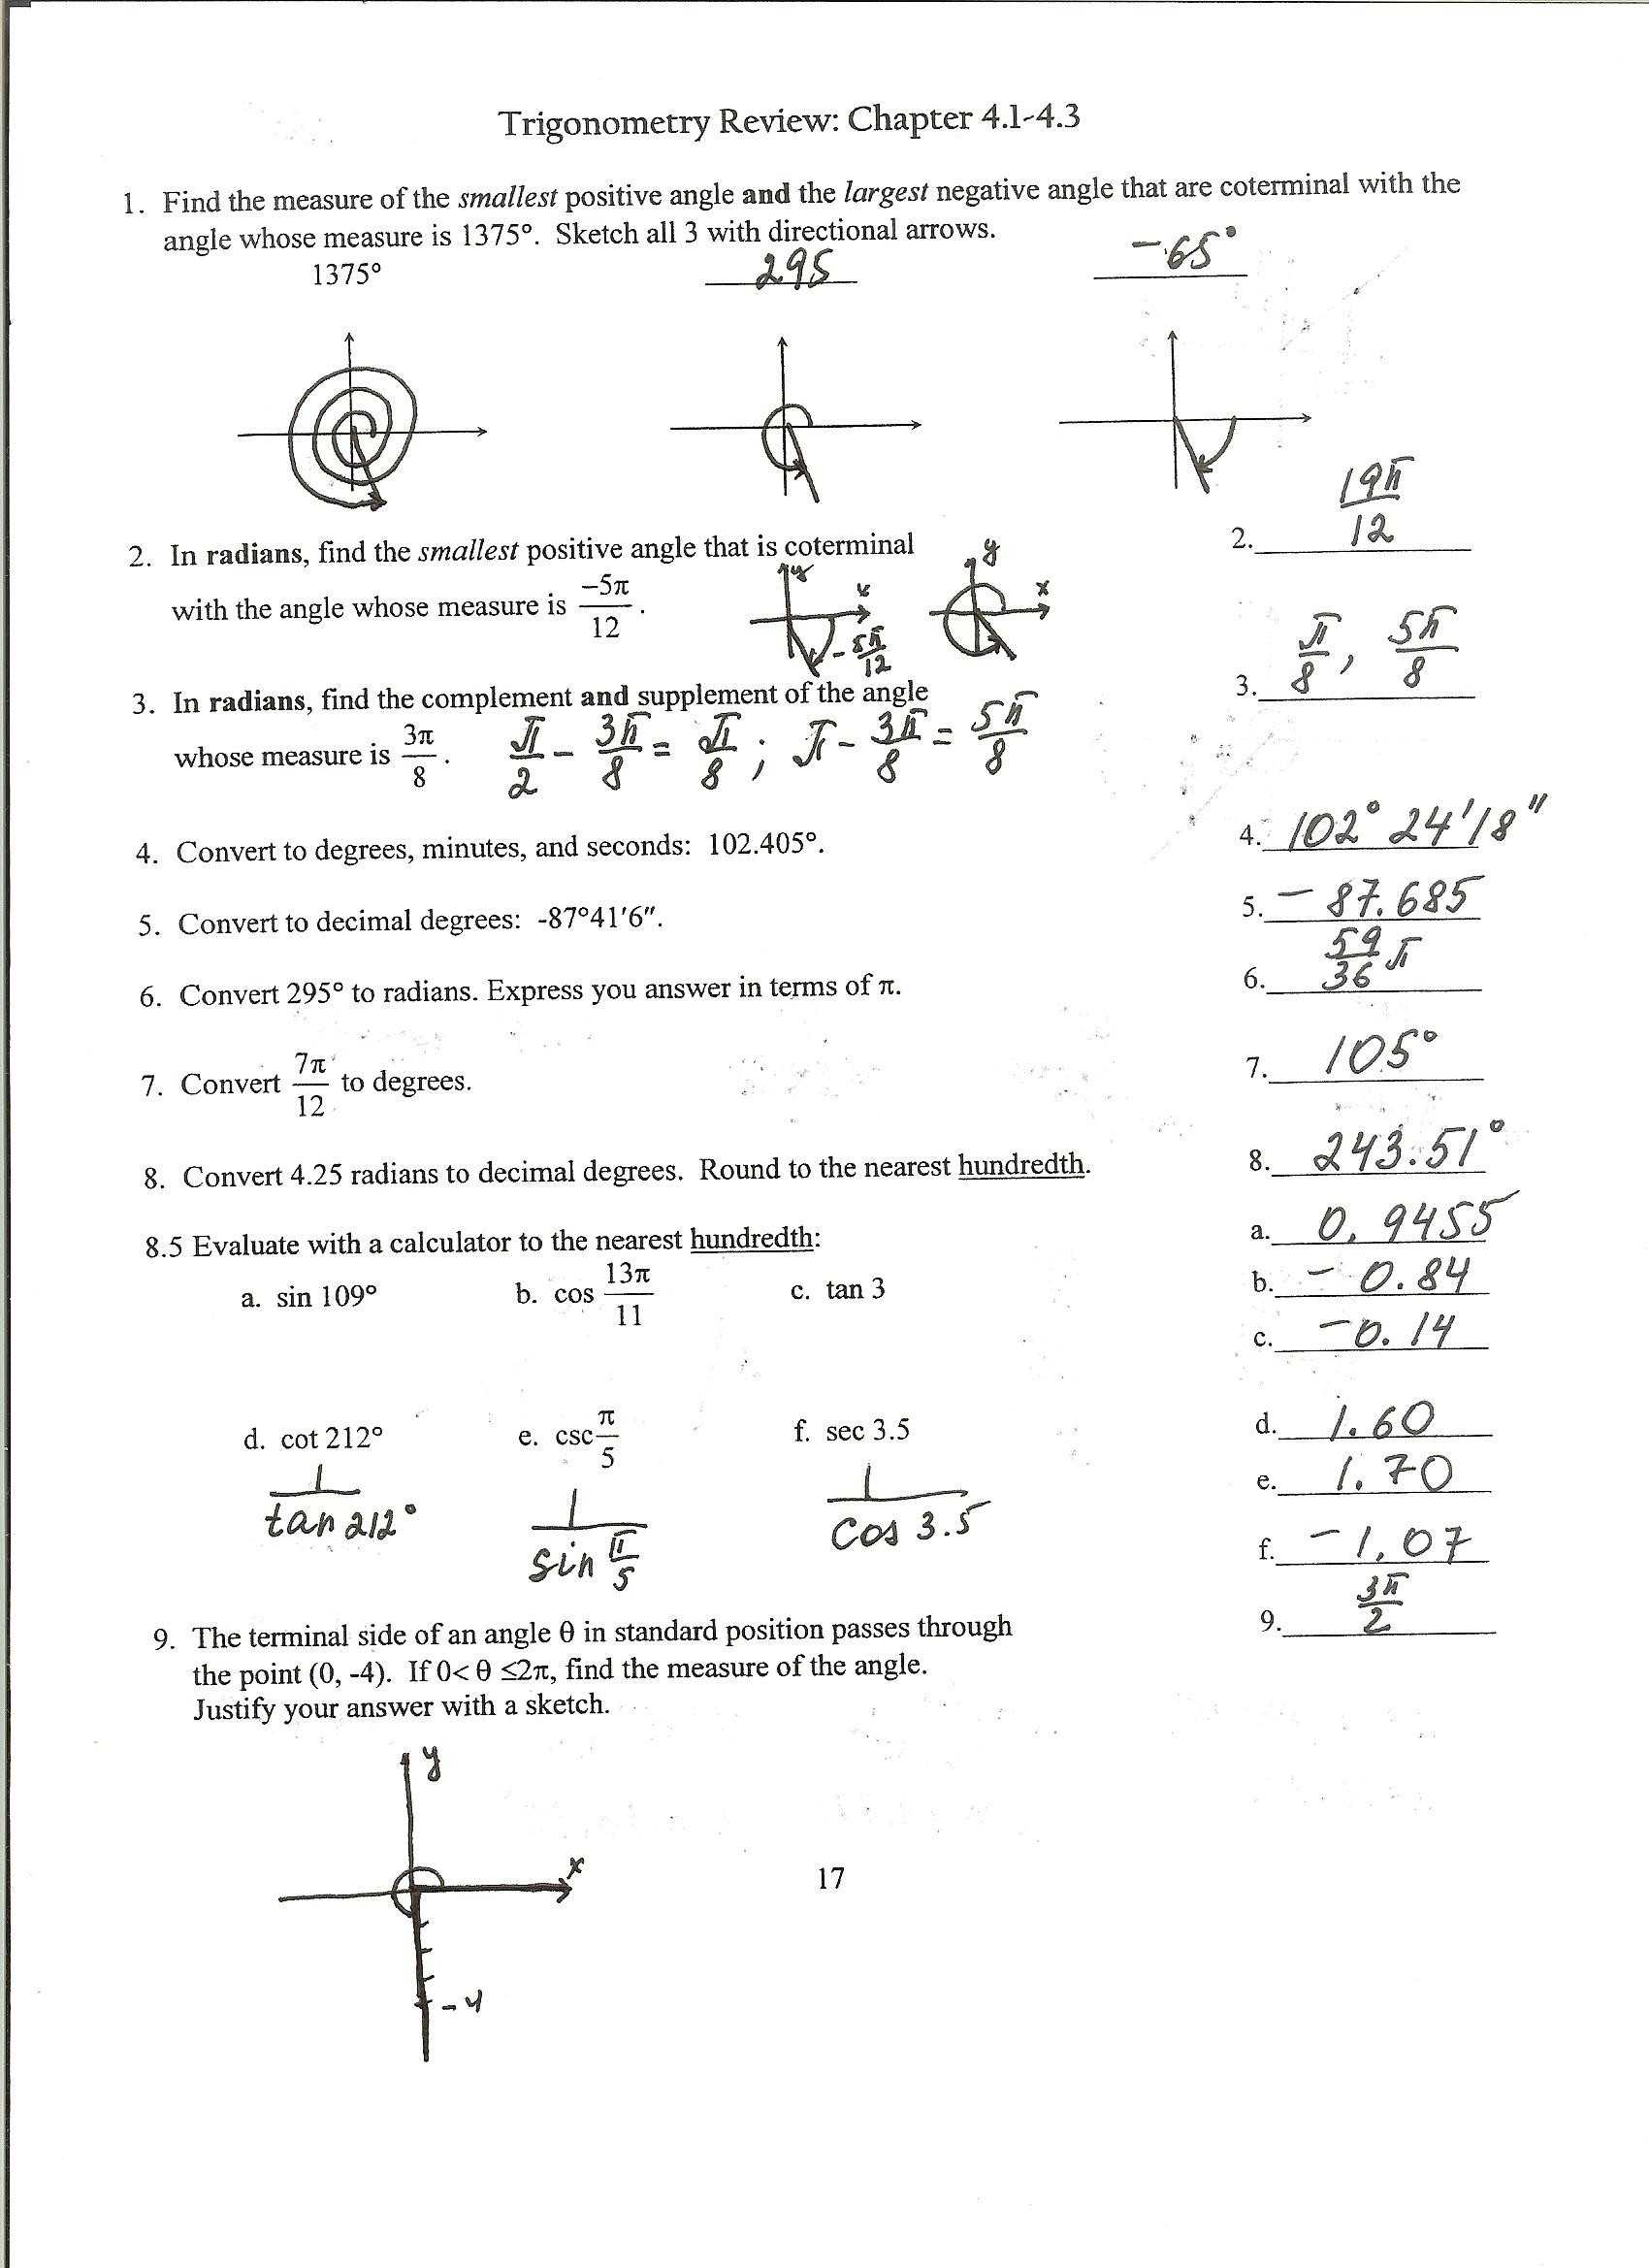 Solving Systems Of Linear Inequalities Worksheet Answers together with Inequality Word Problems Worksheet Best Inequalities Worksheet 0d